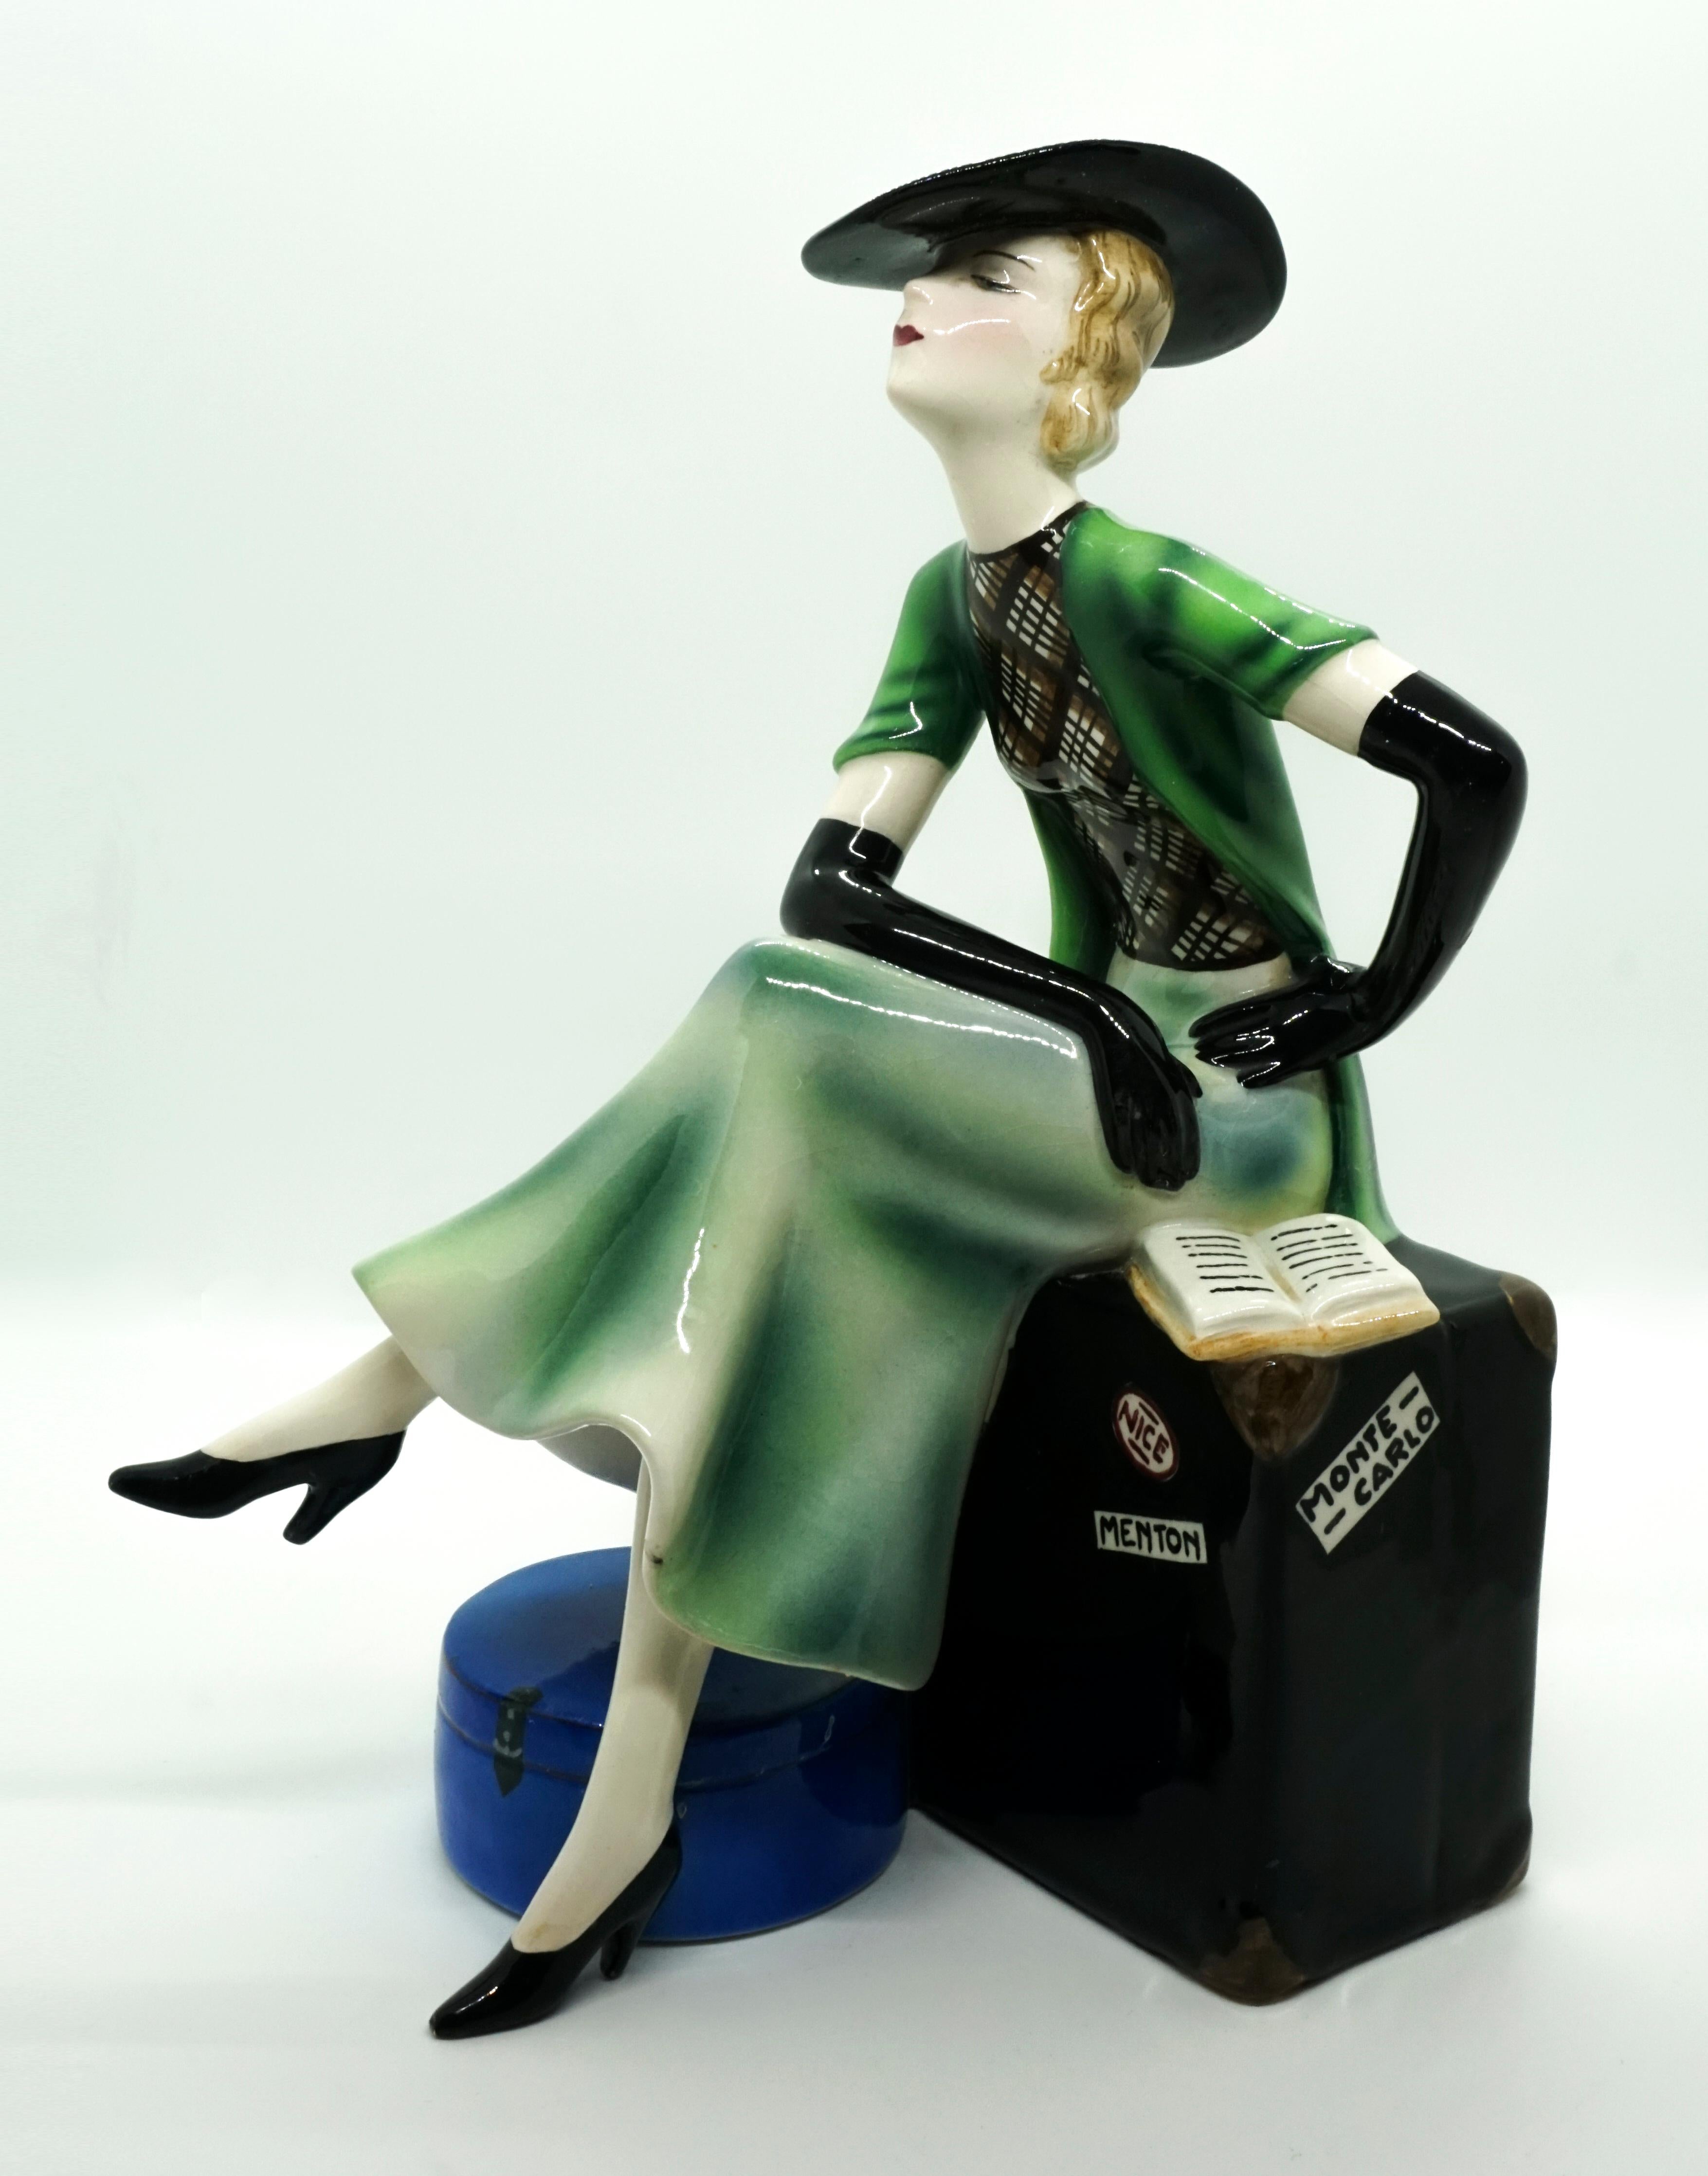 Hand-Painted Goldscheider Vienna Lady with Hat Sitting on a Suitcase by Stephan Dakon, 1935